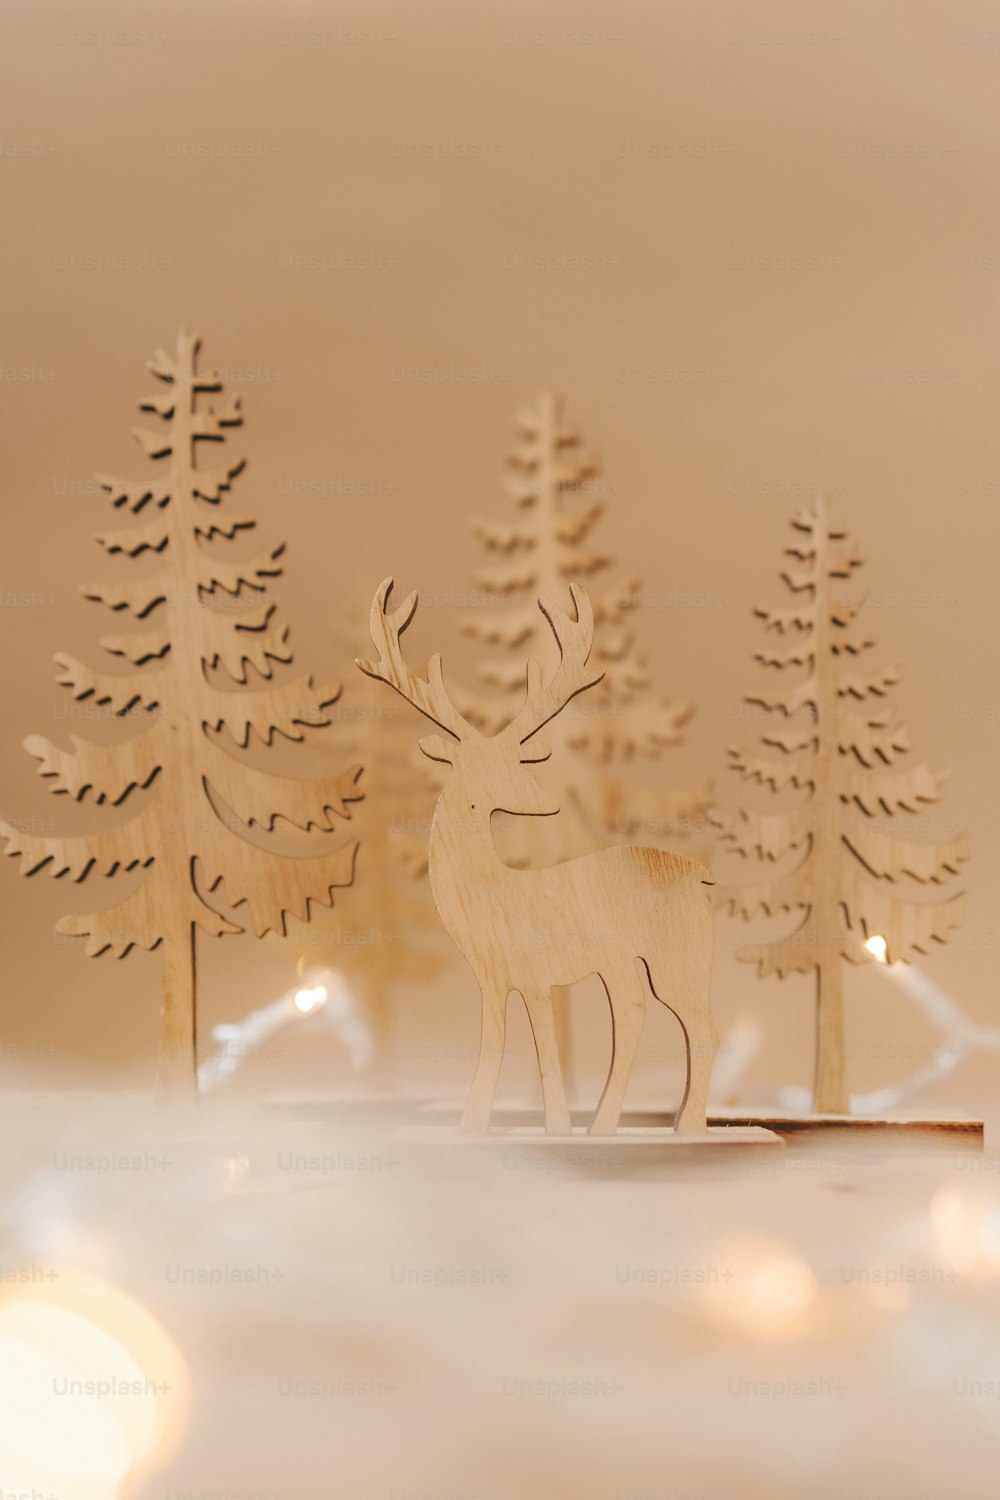 a paper cut of a deer standing in front of some trees